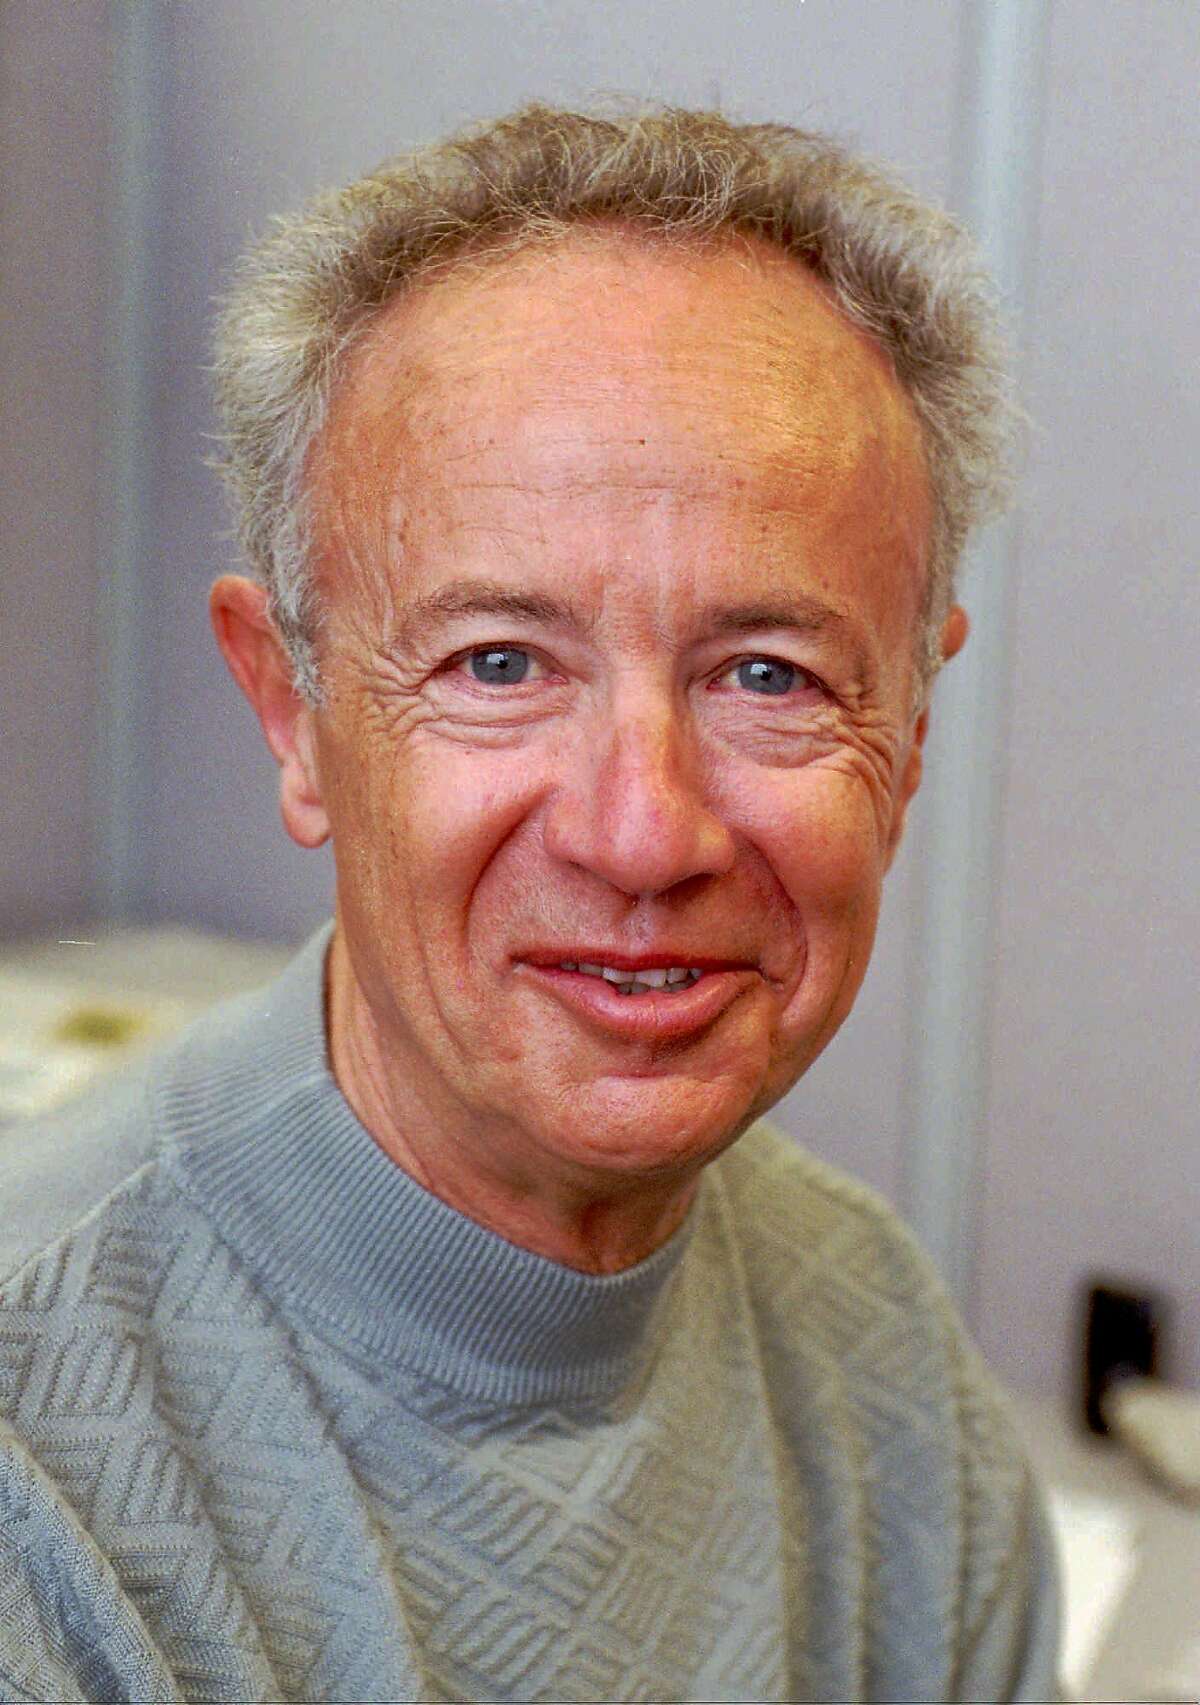 Andrew (Andy) Grove is shown at Intel headquarters in Santa Clara, Calif., Thursday morning, March 26, 1998. Grove, whose innovative use of microchip technology fueled the personal computer revolution, is resigning as chief executive of Intel Corp. Grove will be succeeded by Craig Barrett, the chipmaker's president and chief operating officer (AP Photo/Paul Sakuma) ALSO RAN 8/9/02